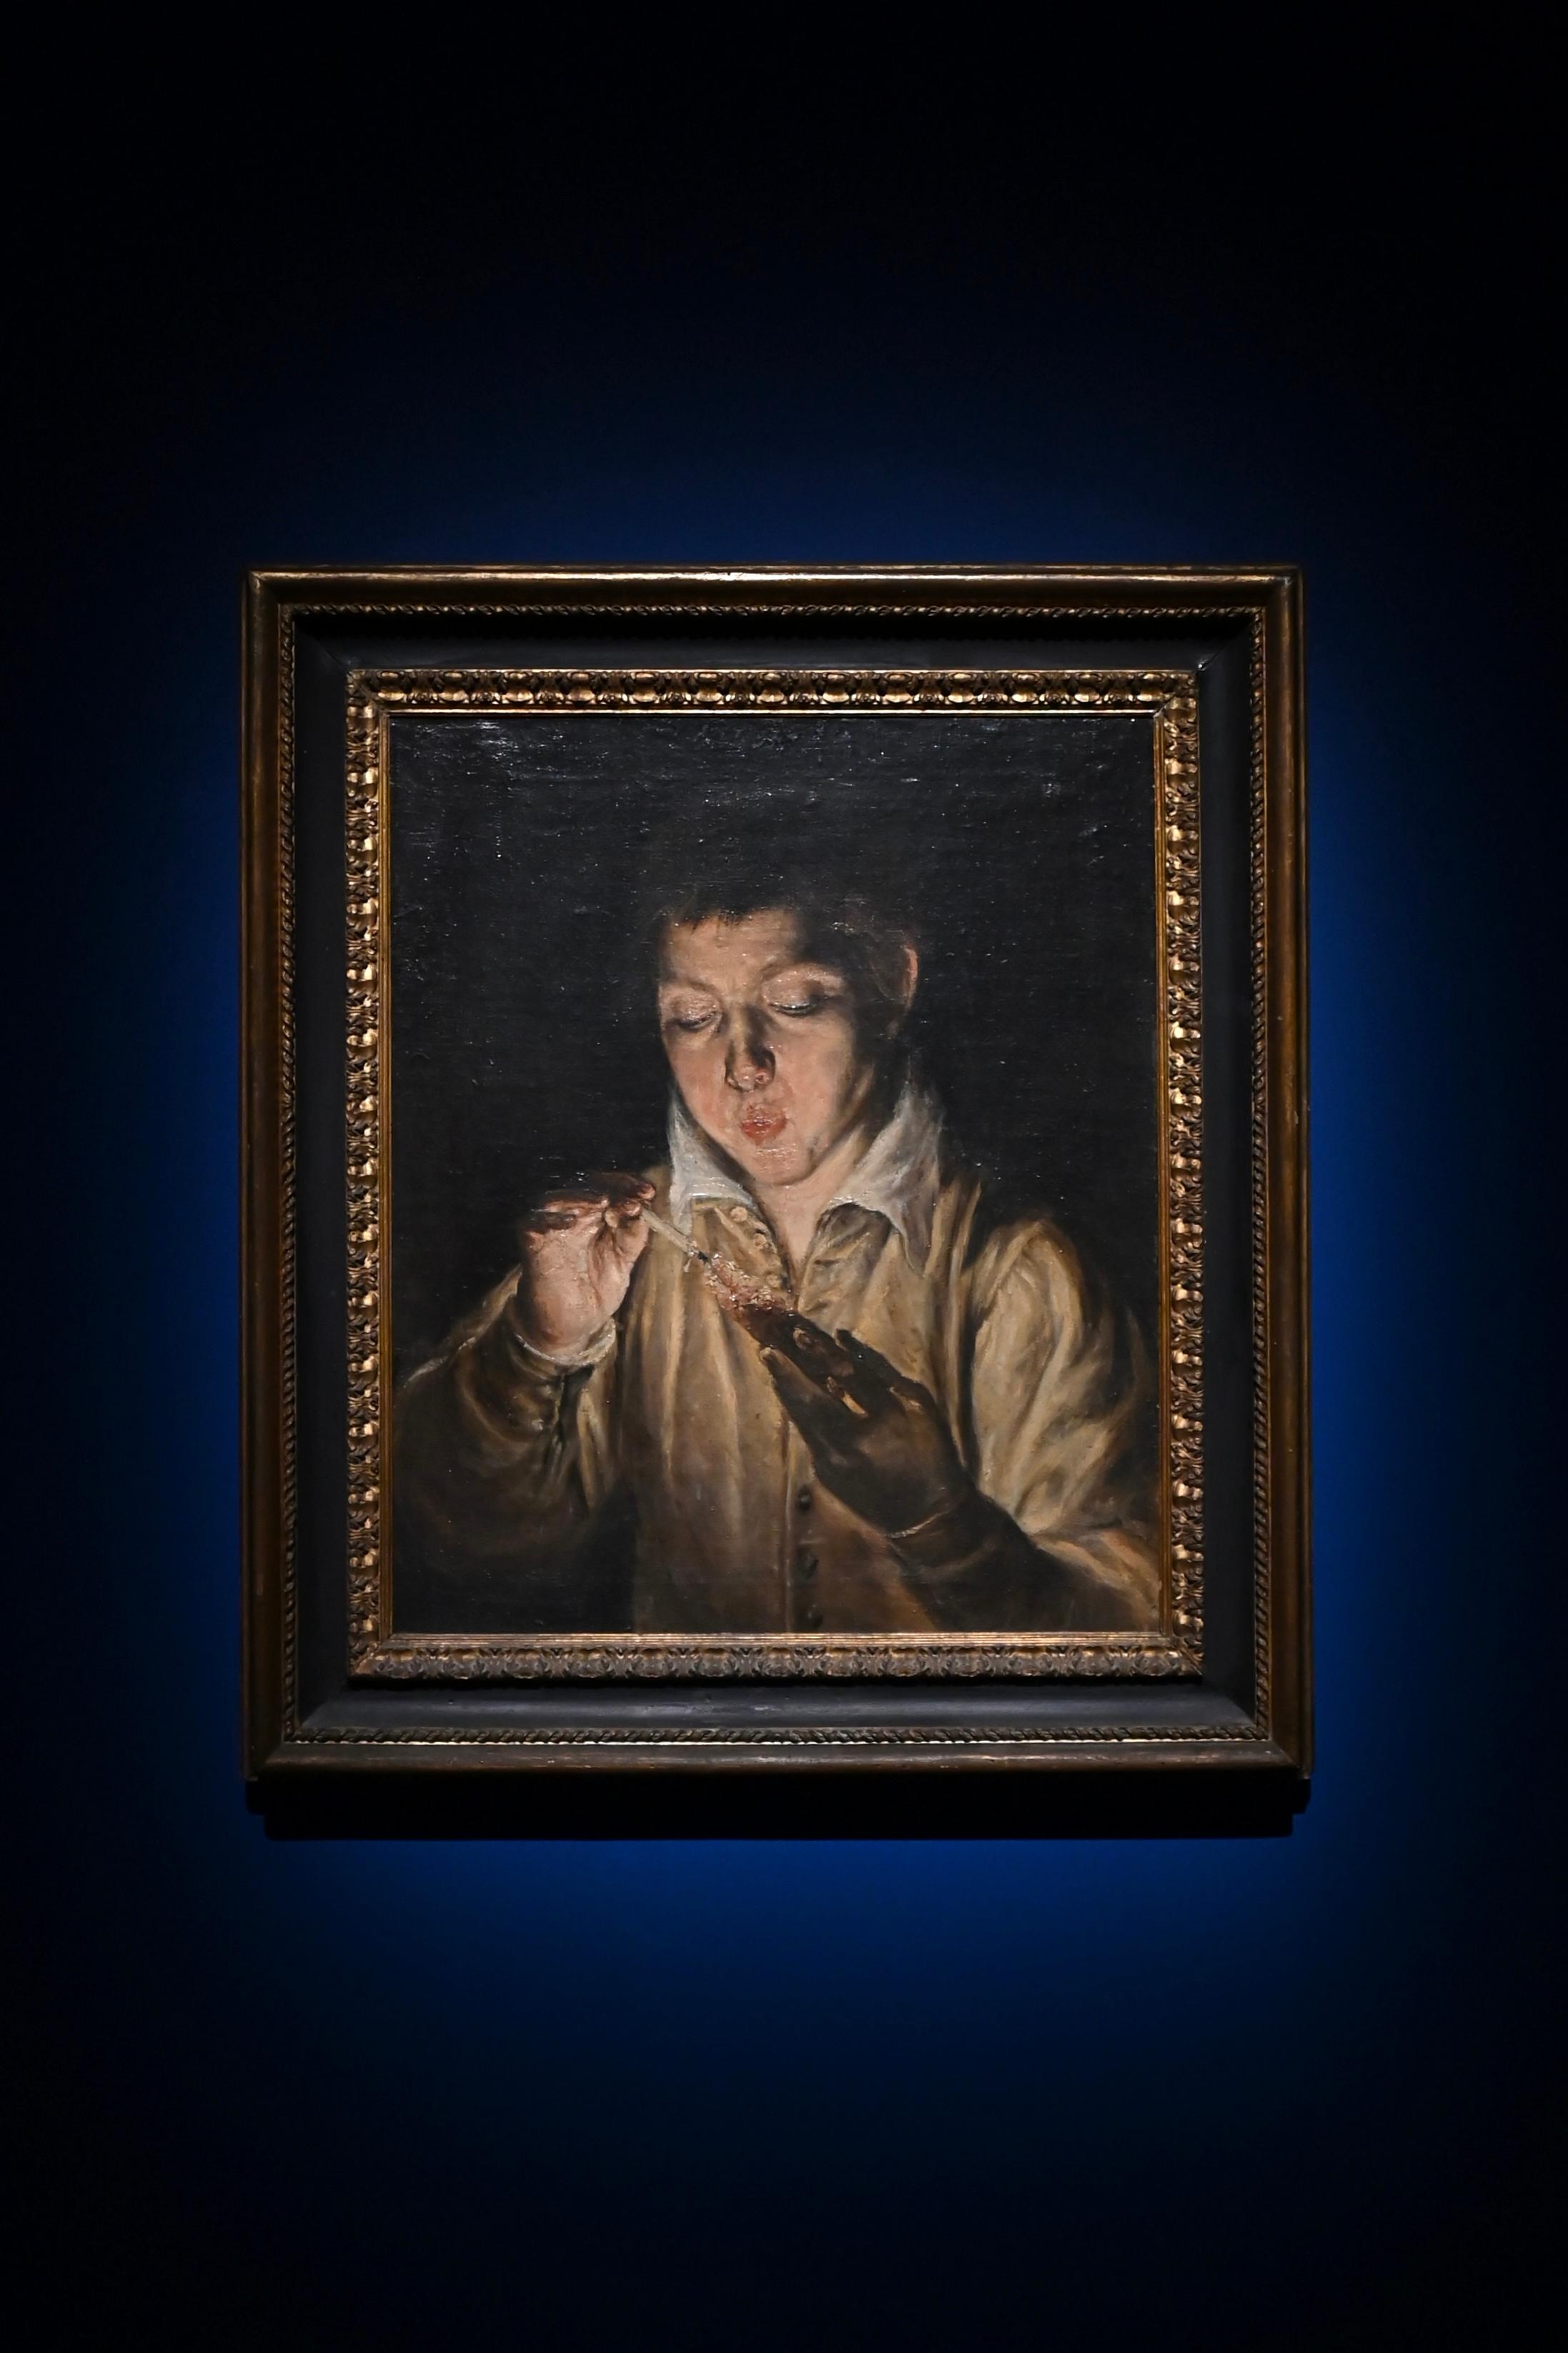 "The Hong Kong Jockey Club Series: The Road to the Baroque - Masterpieces from the Capodimonte Museum" exhibition will be held from tomorrow (July 15) at the Hong Kong Museum of Art. Picture shows the painting, "Boy Blowing on an Ember", by El Greco.
